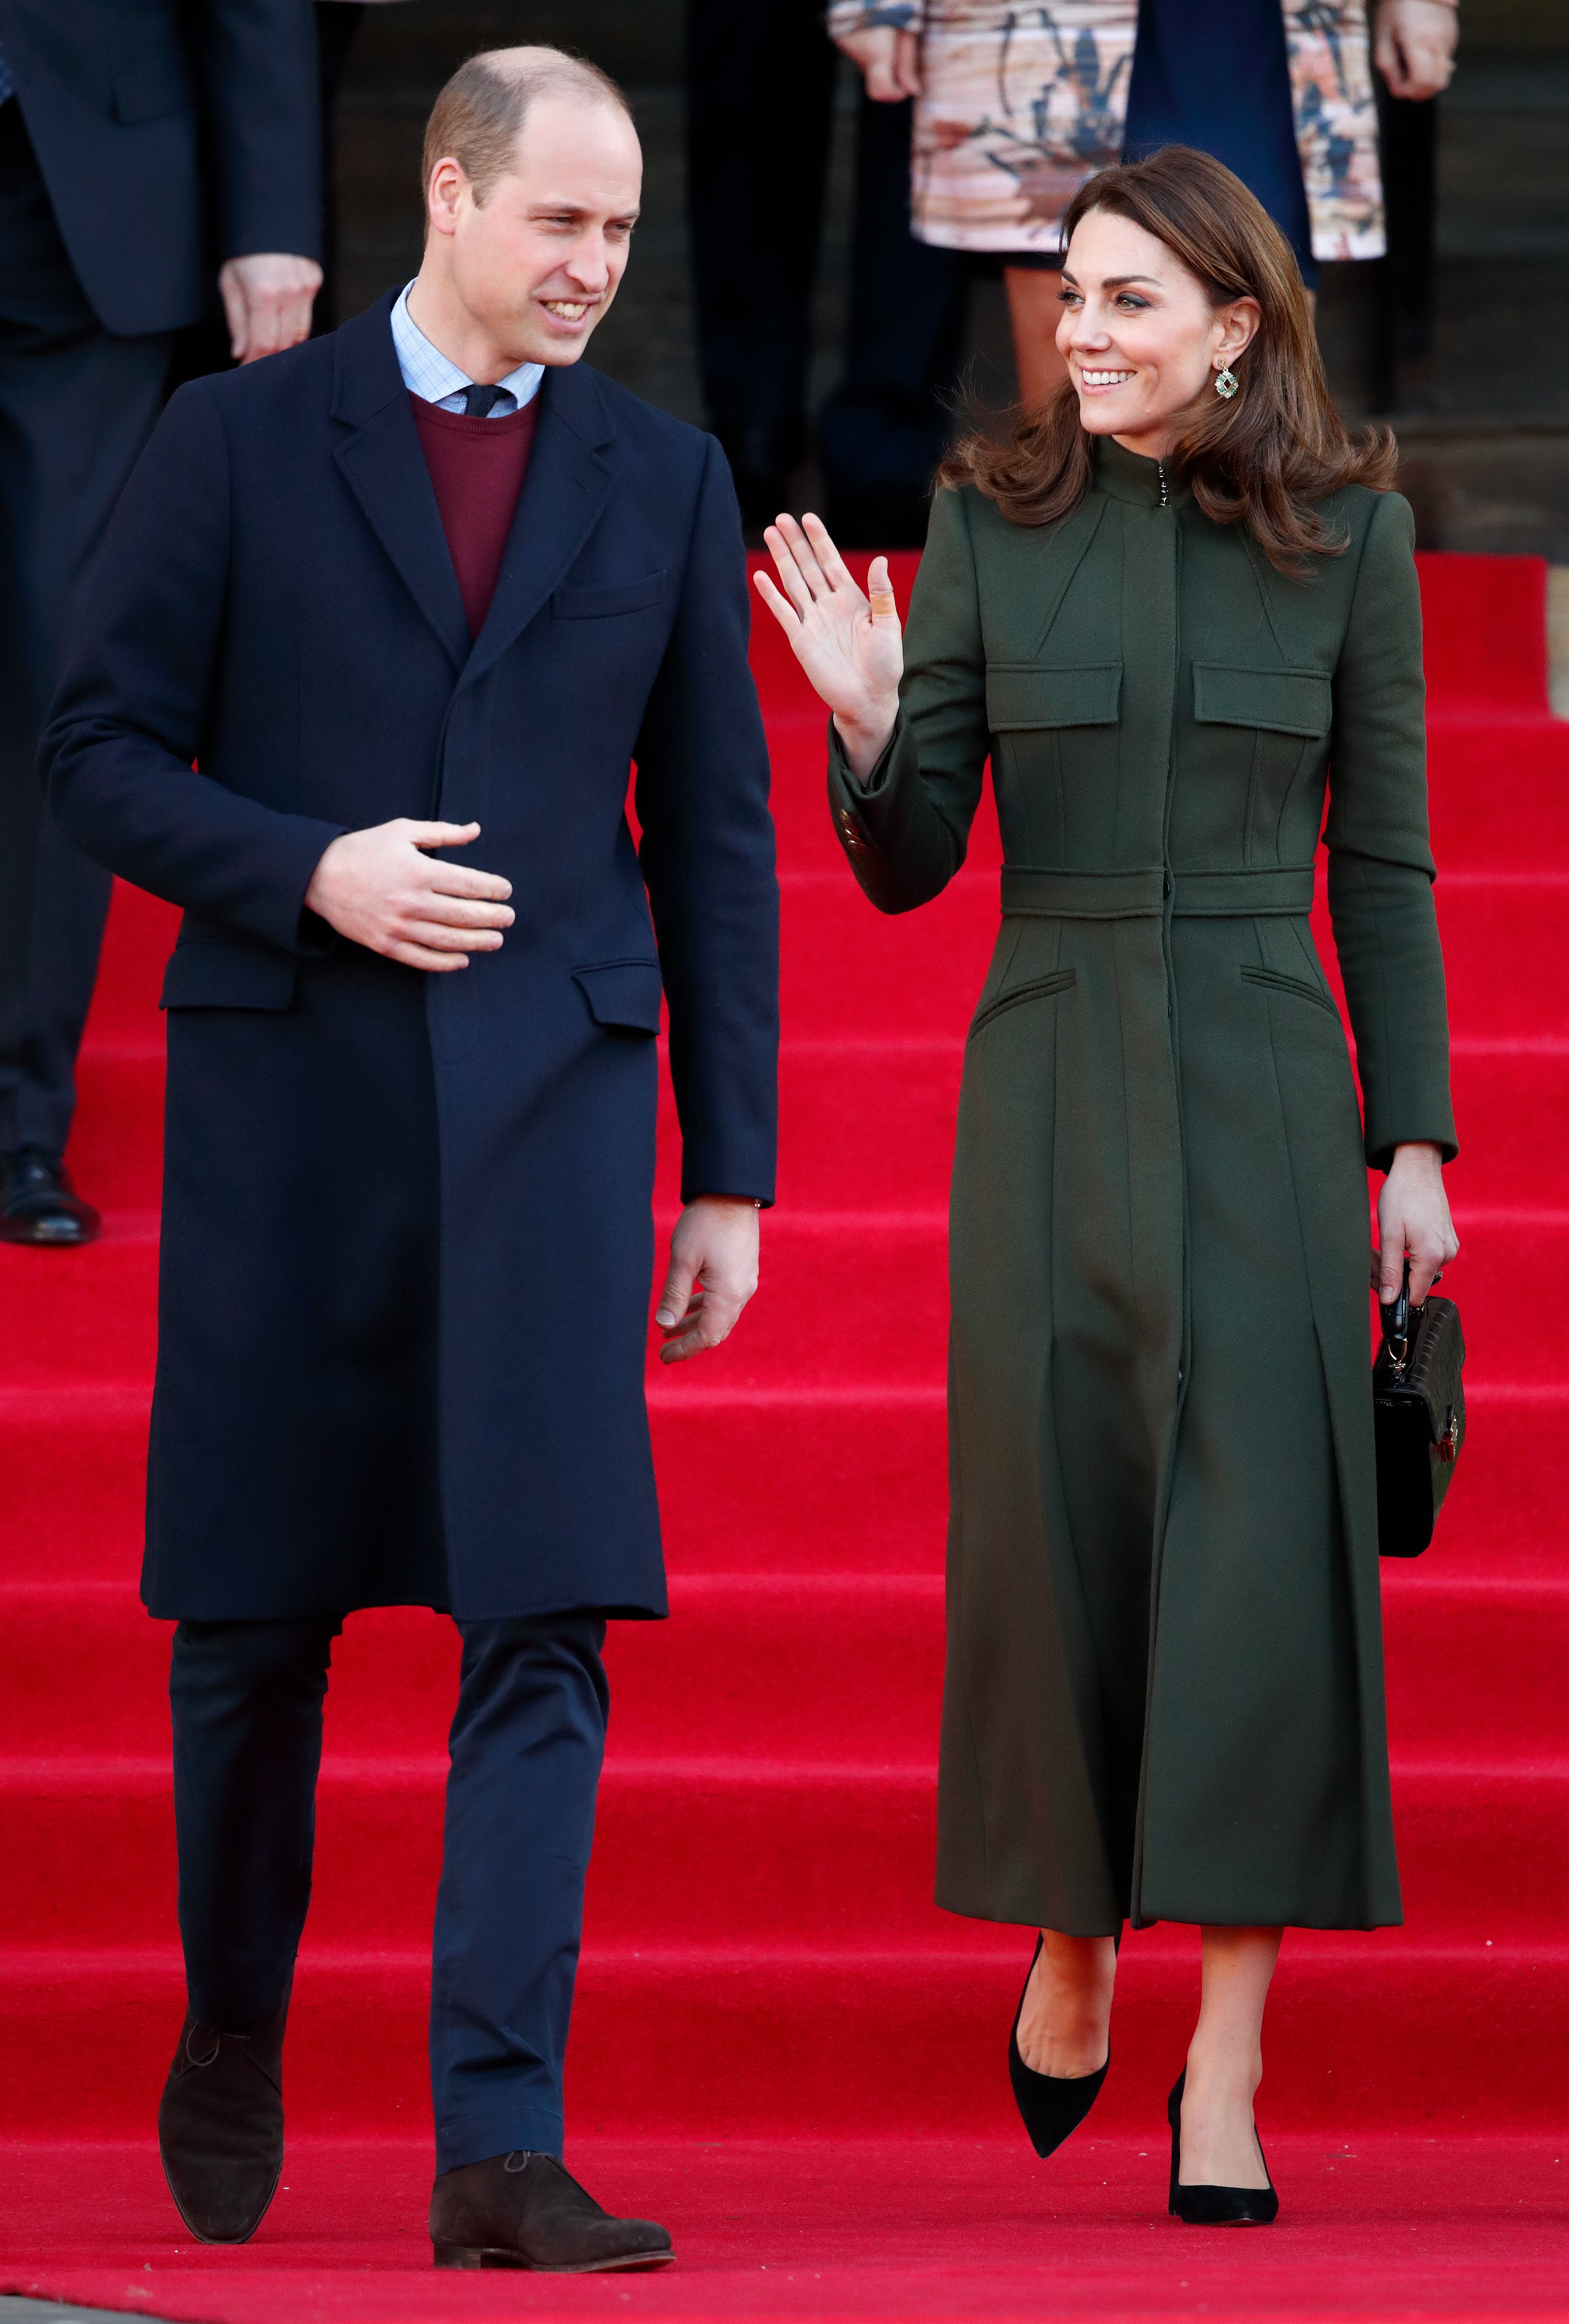 Le prince William et Kate Middleton | photo : Getty Images